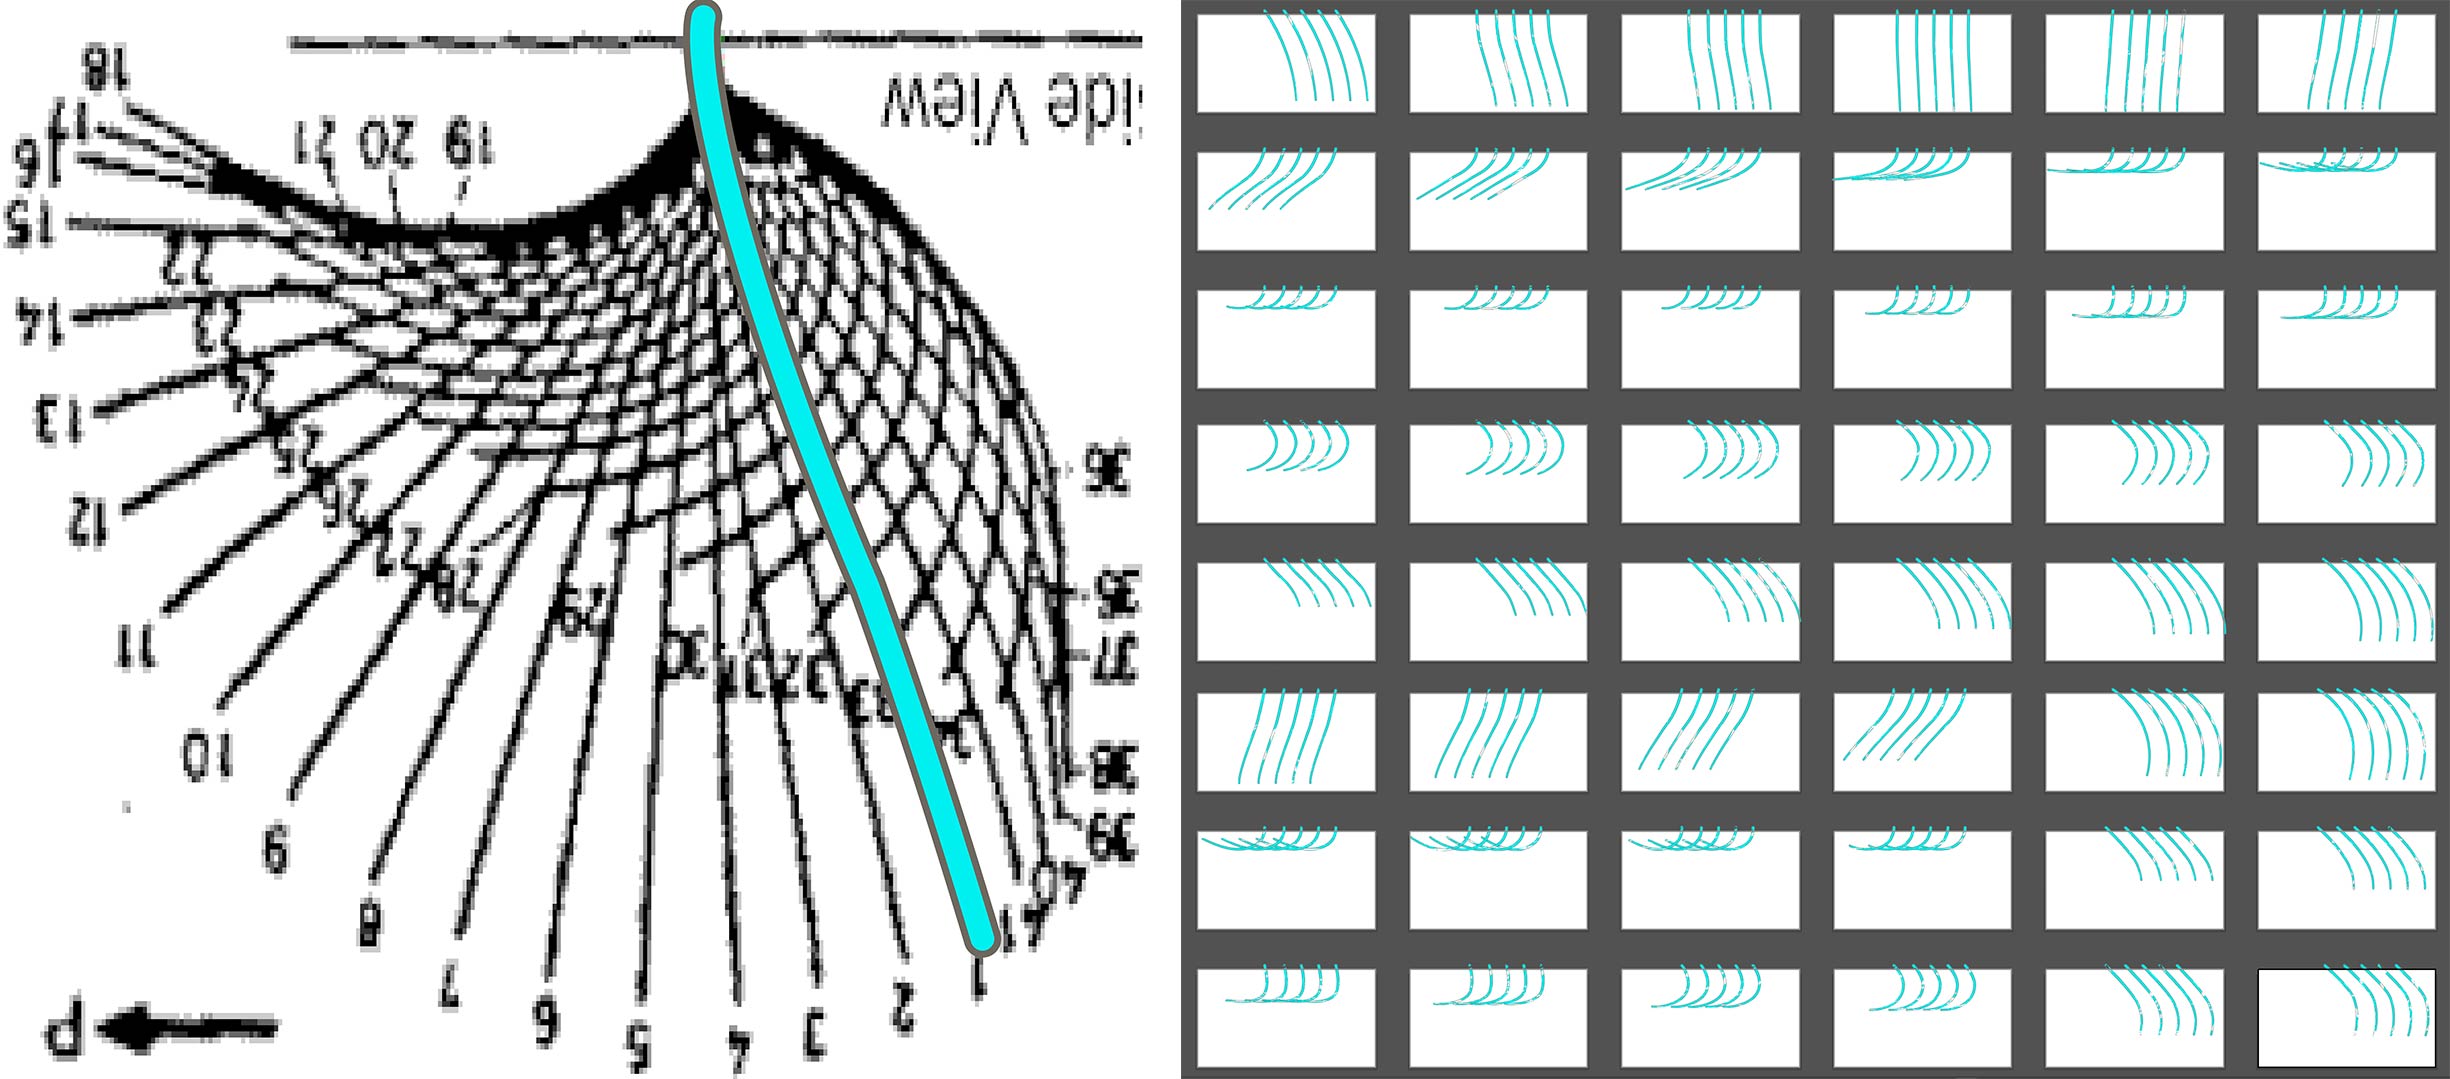 An illustrated cilium overlays a diagram mapping the motion of a single cilium. Next to it is a series of panels of all cilia, each representing a single step of the previously mentioned diagram.